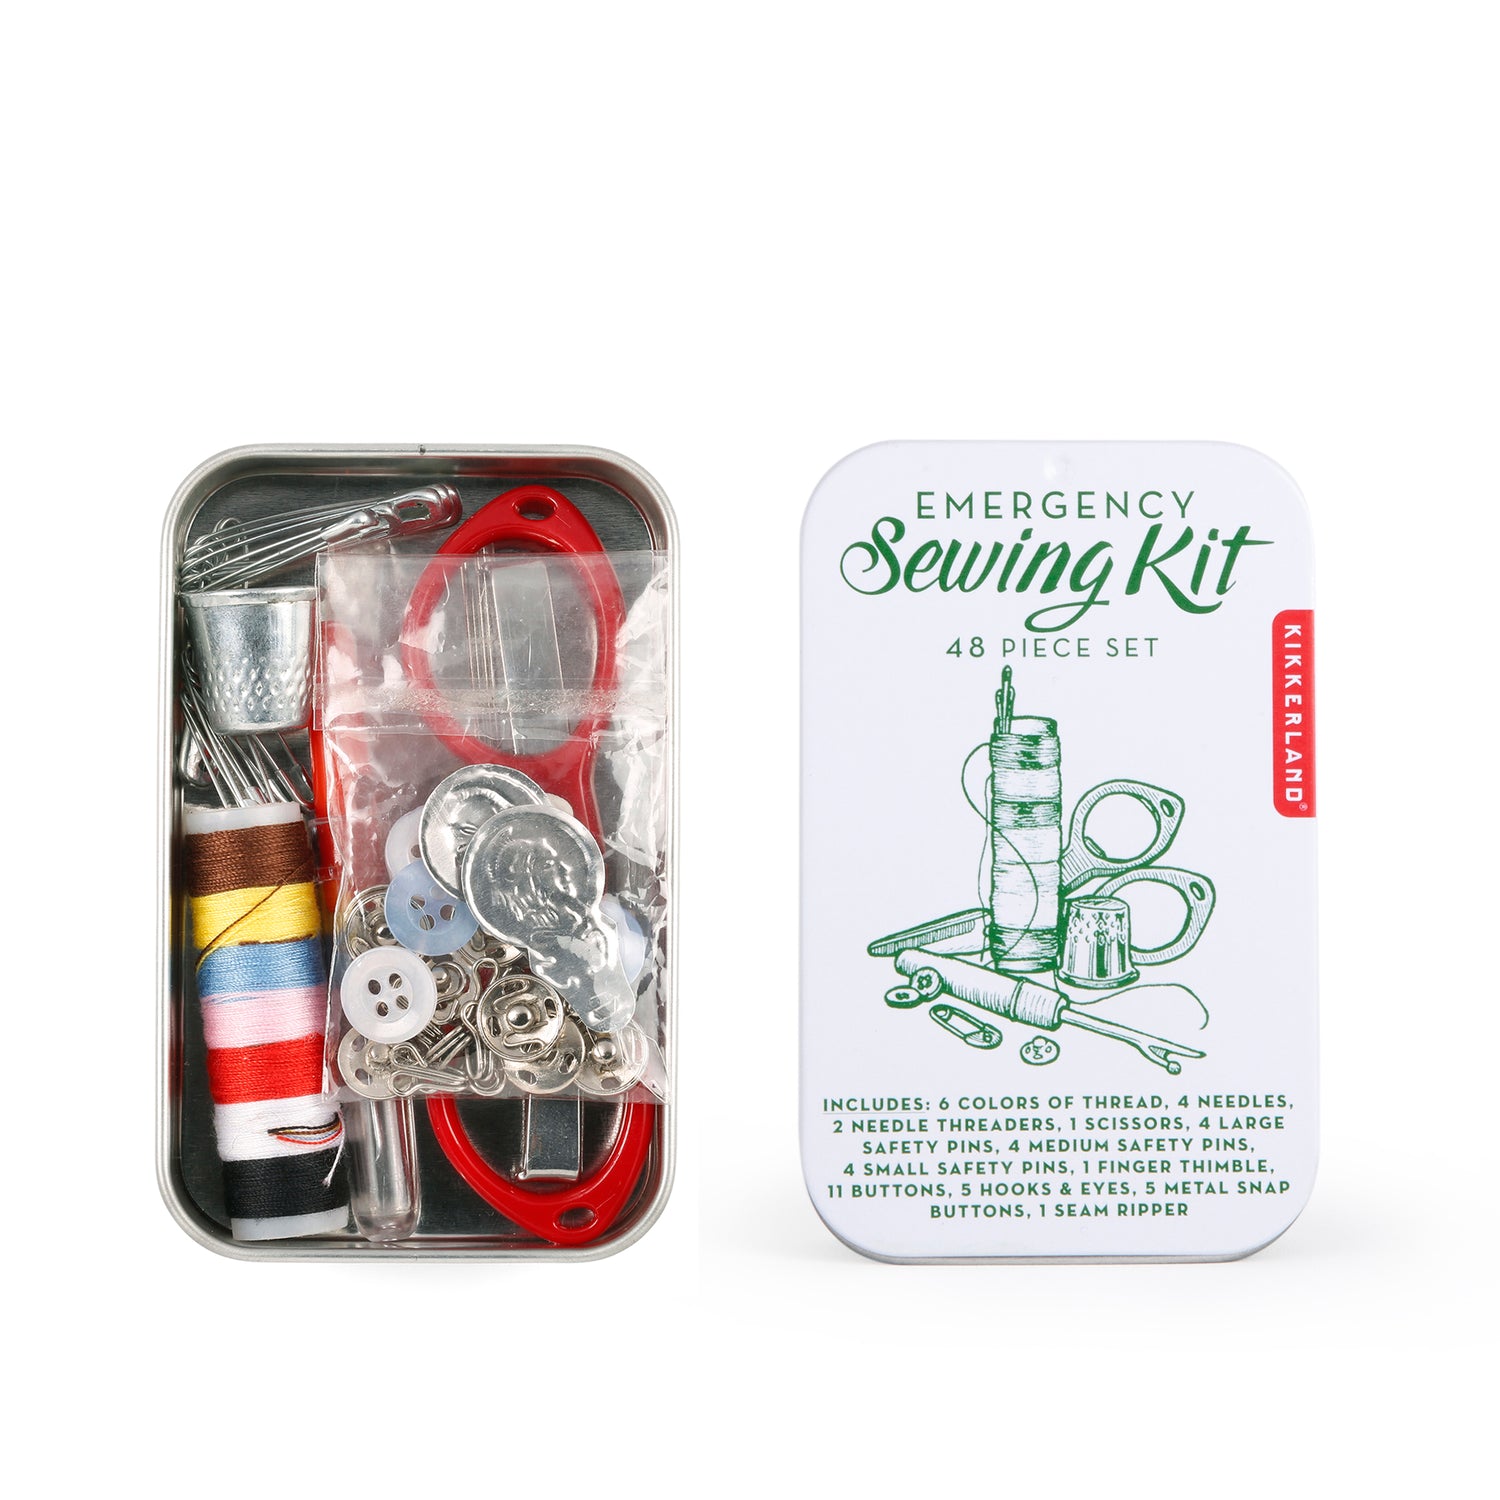 https://cdn.shopify.com/s/files/1/1140/3964/products/CD134_Sewing_Kit_PKG_updated.jpg?v=1578956768&width=1500